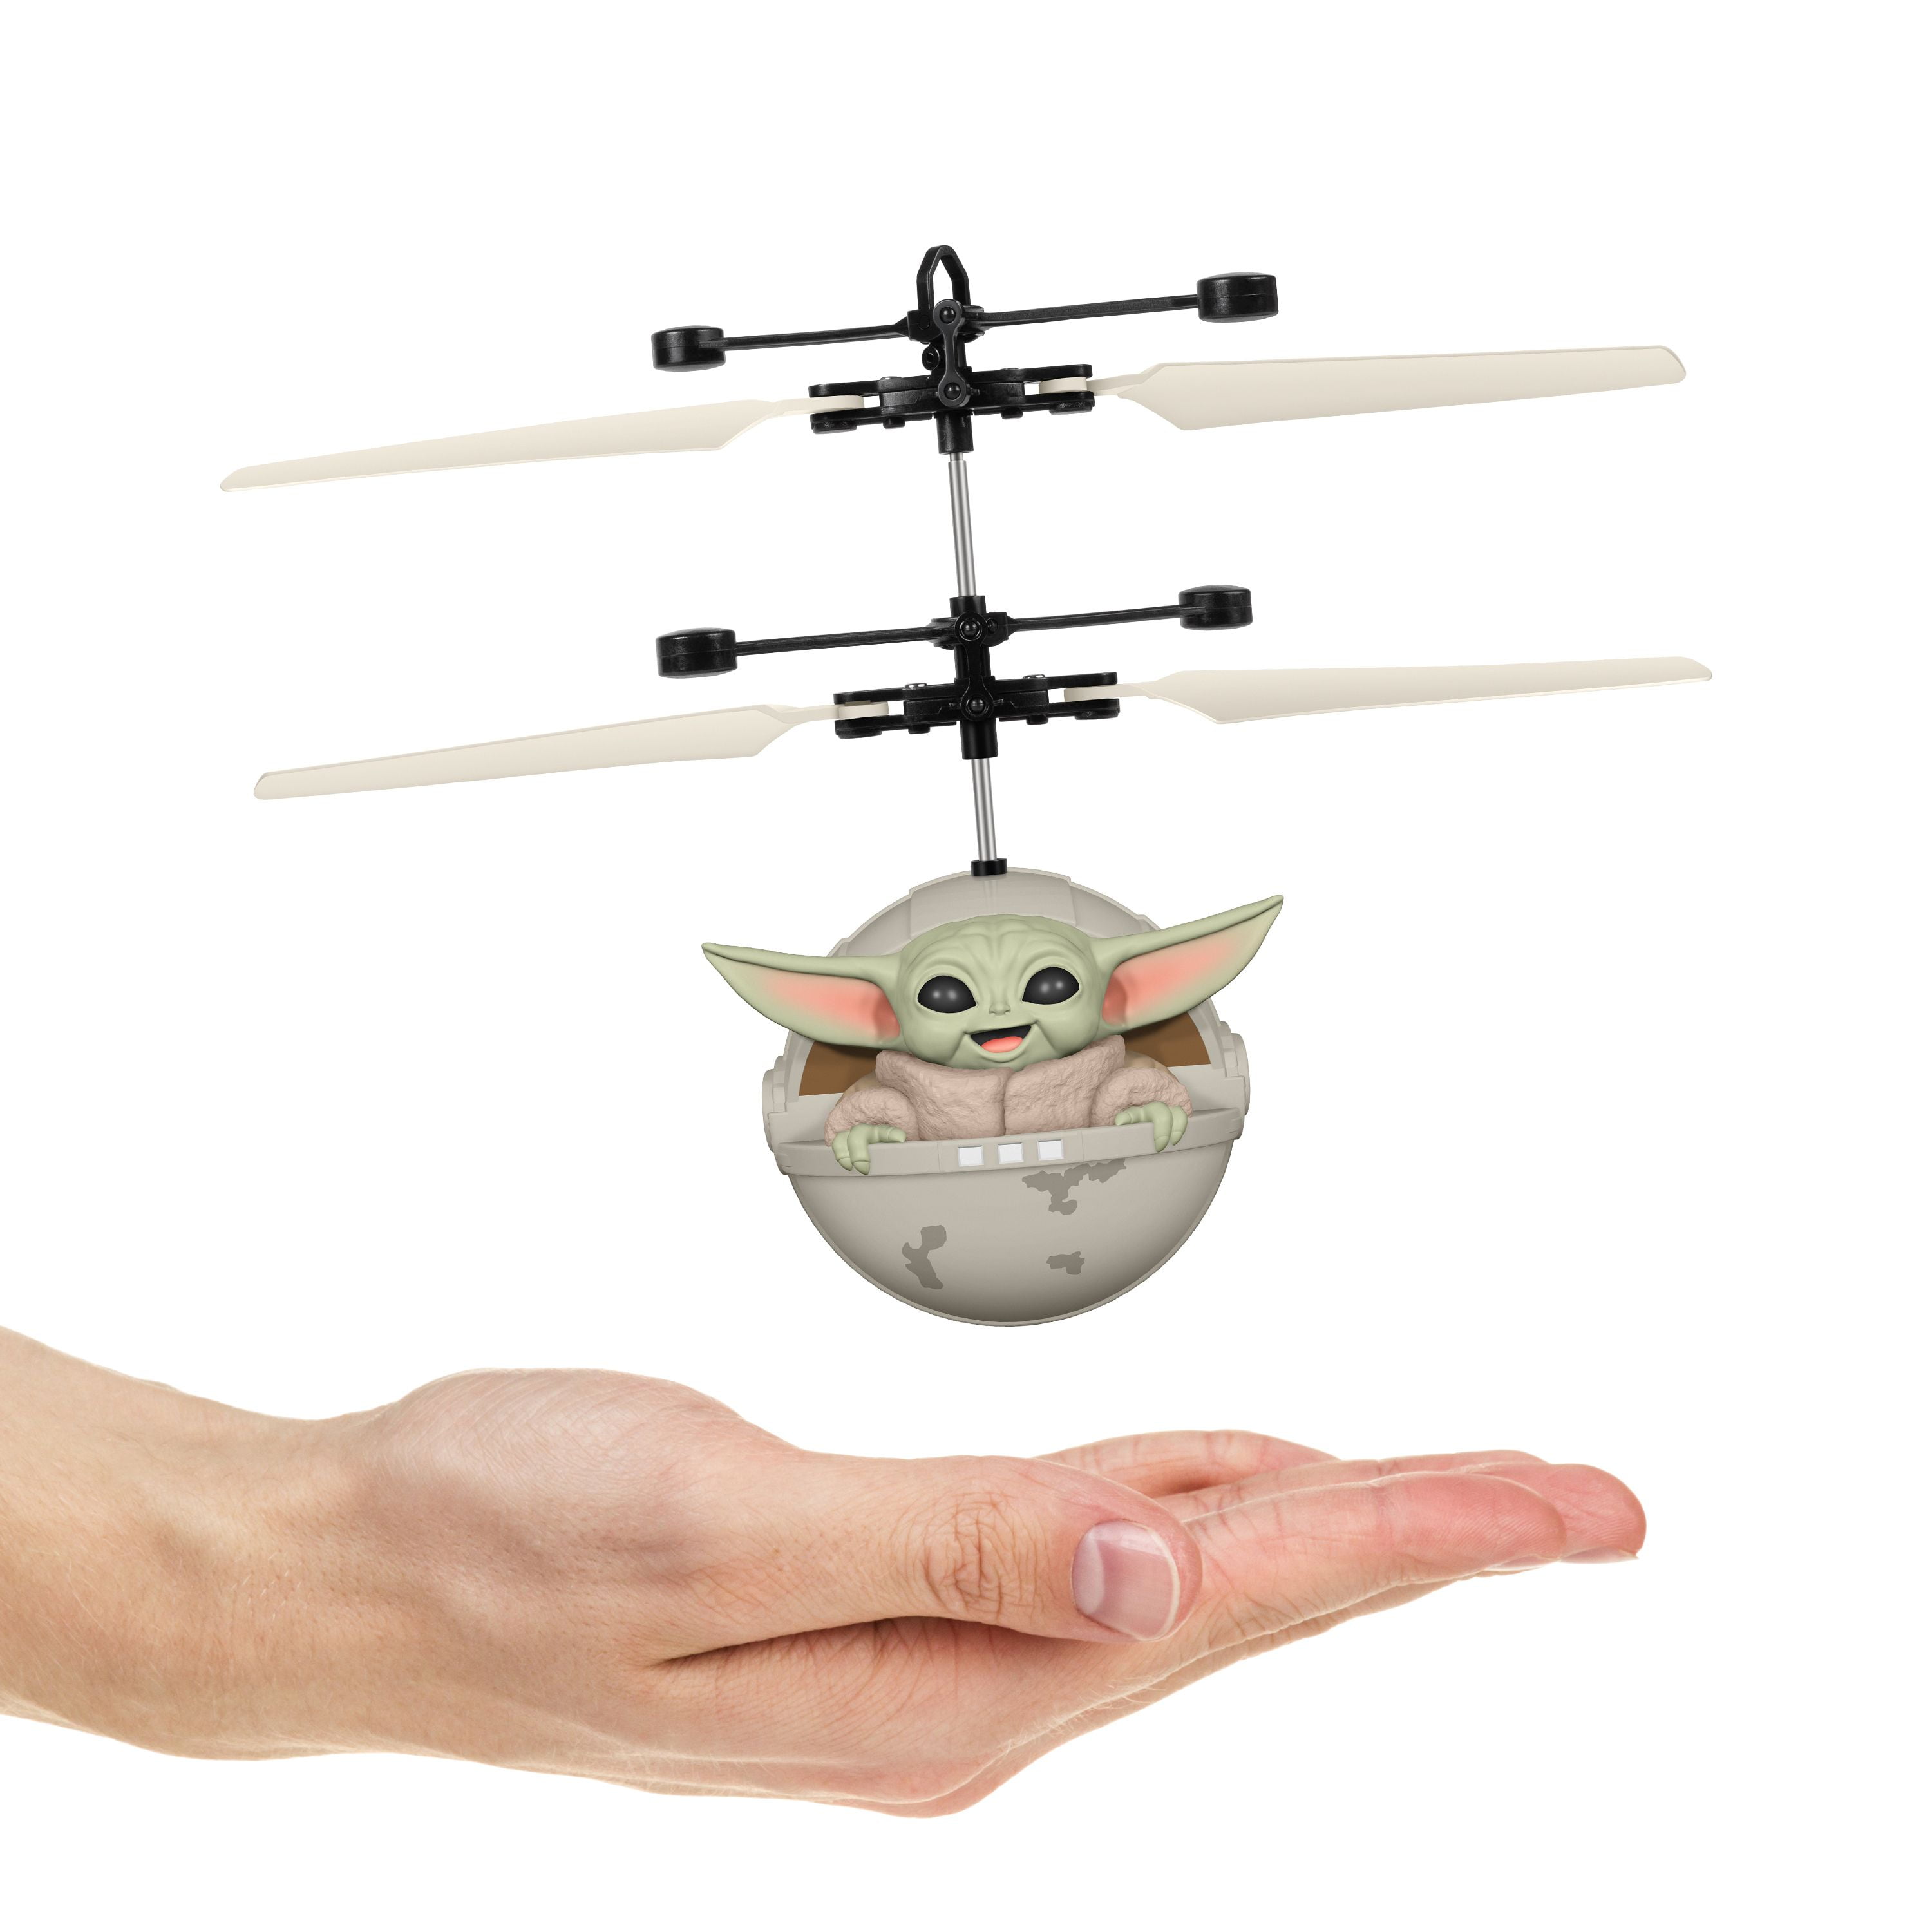 Star Wars Mandalorian The Child Motion Sensing Flying Helicopter Baby Yoda Drone 